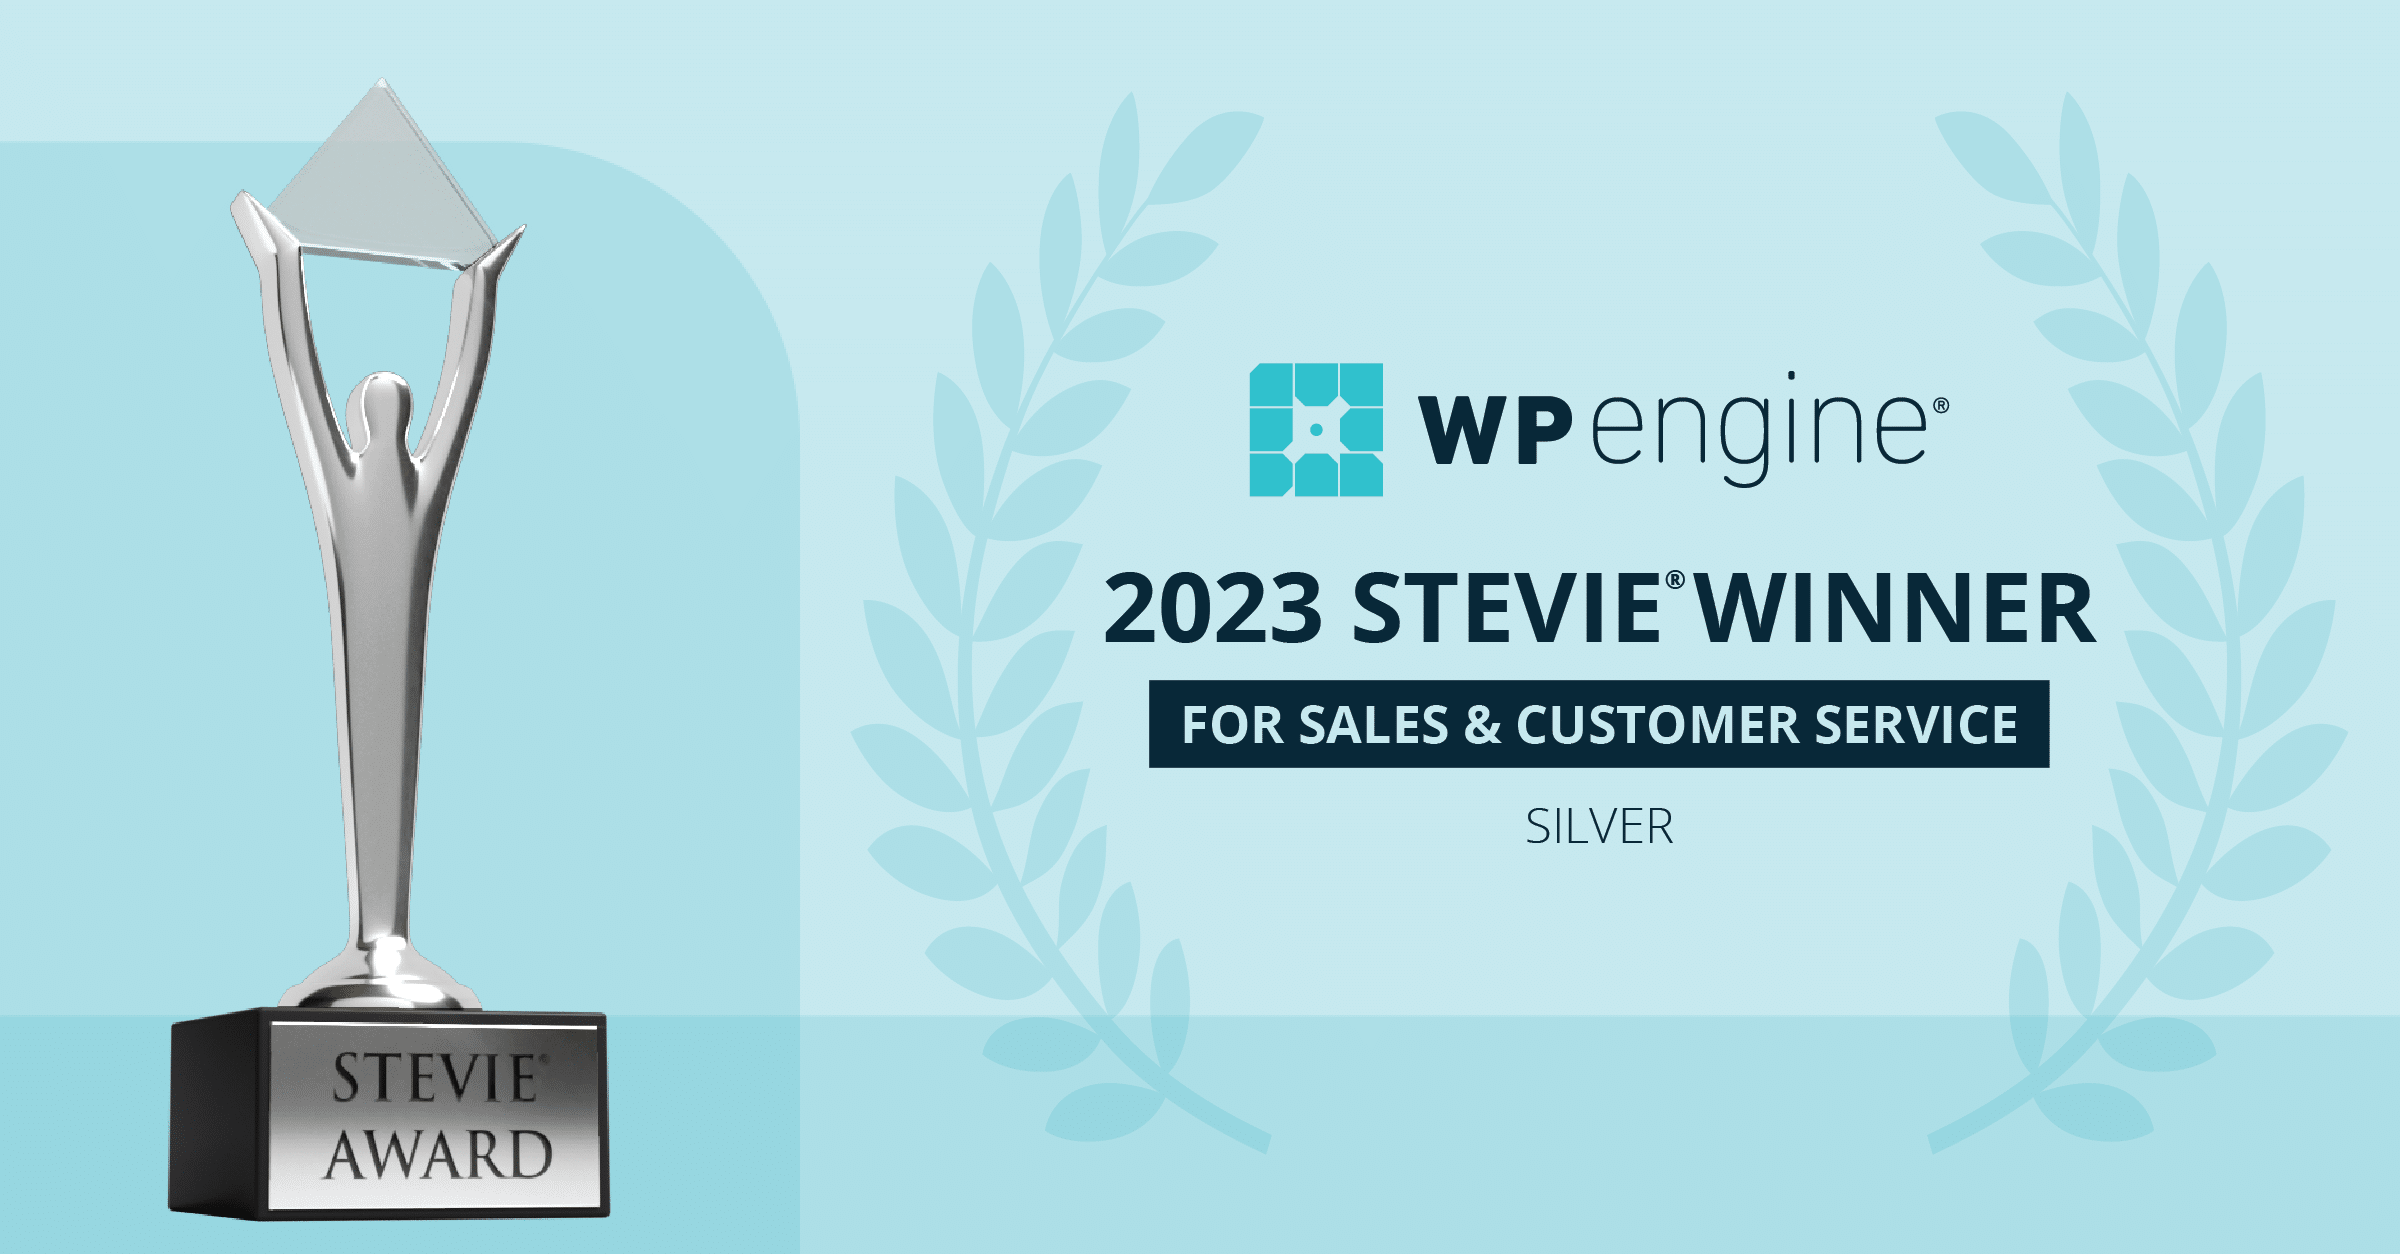 On the righthand side of the image, the WP Engine logo sits above the words 2023 Stevie Winner for Sales and Customer Service, Silver. An image of the award sits on the lefthand side of the image